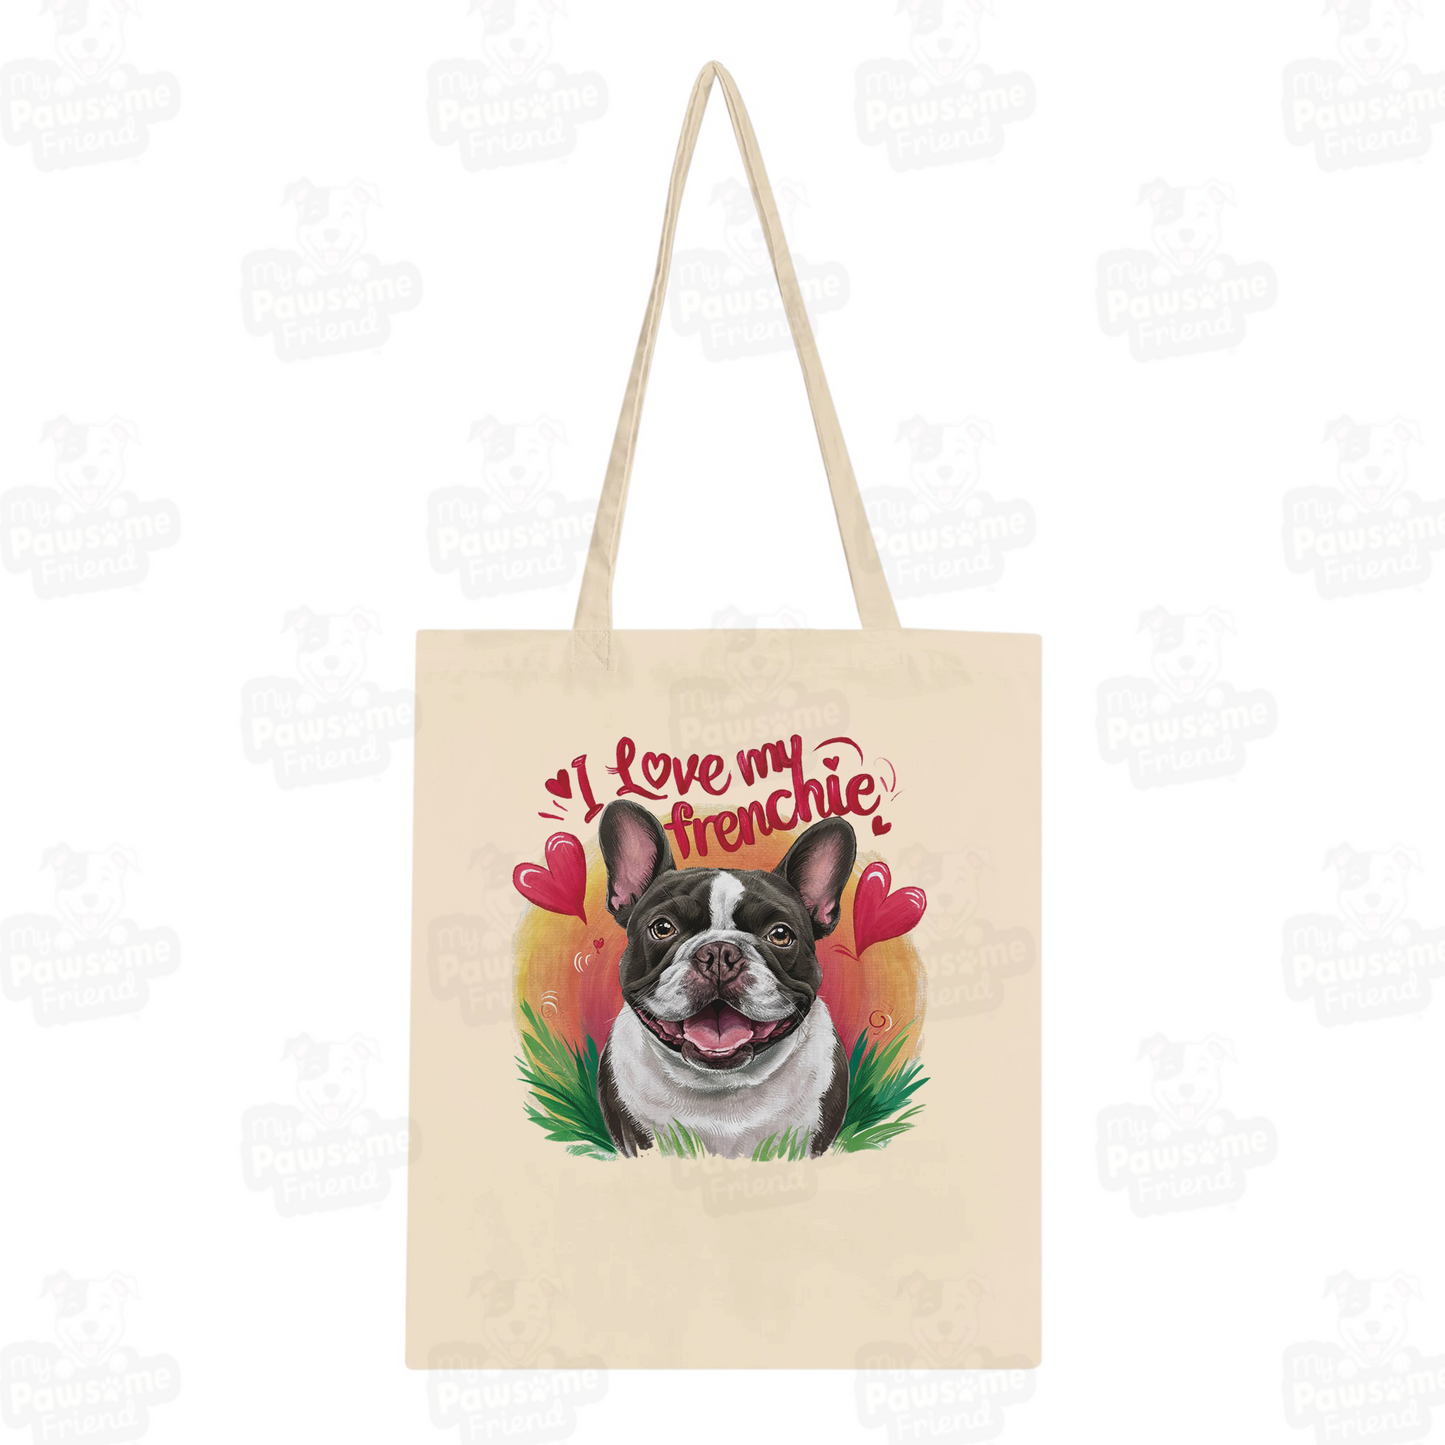 A Tote bag with a cute design featuring a french bulldog smiling surrounded by heart designs, and the phrase "I love my Frenchie". The color of the tote bag is natural